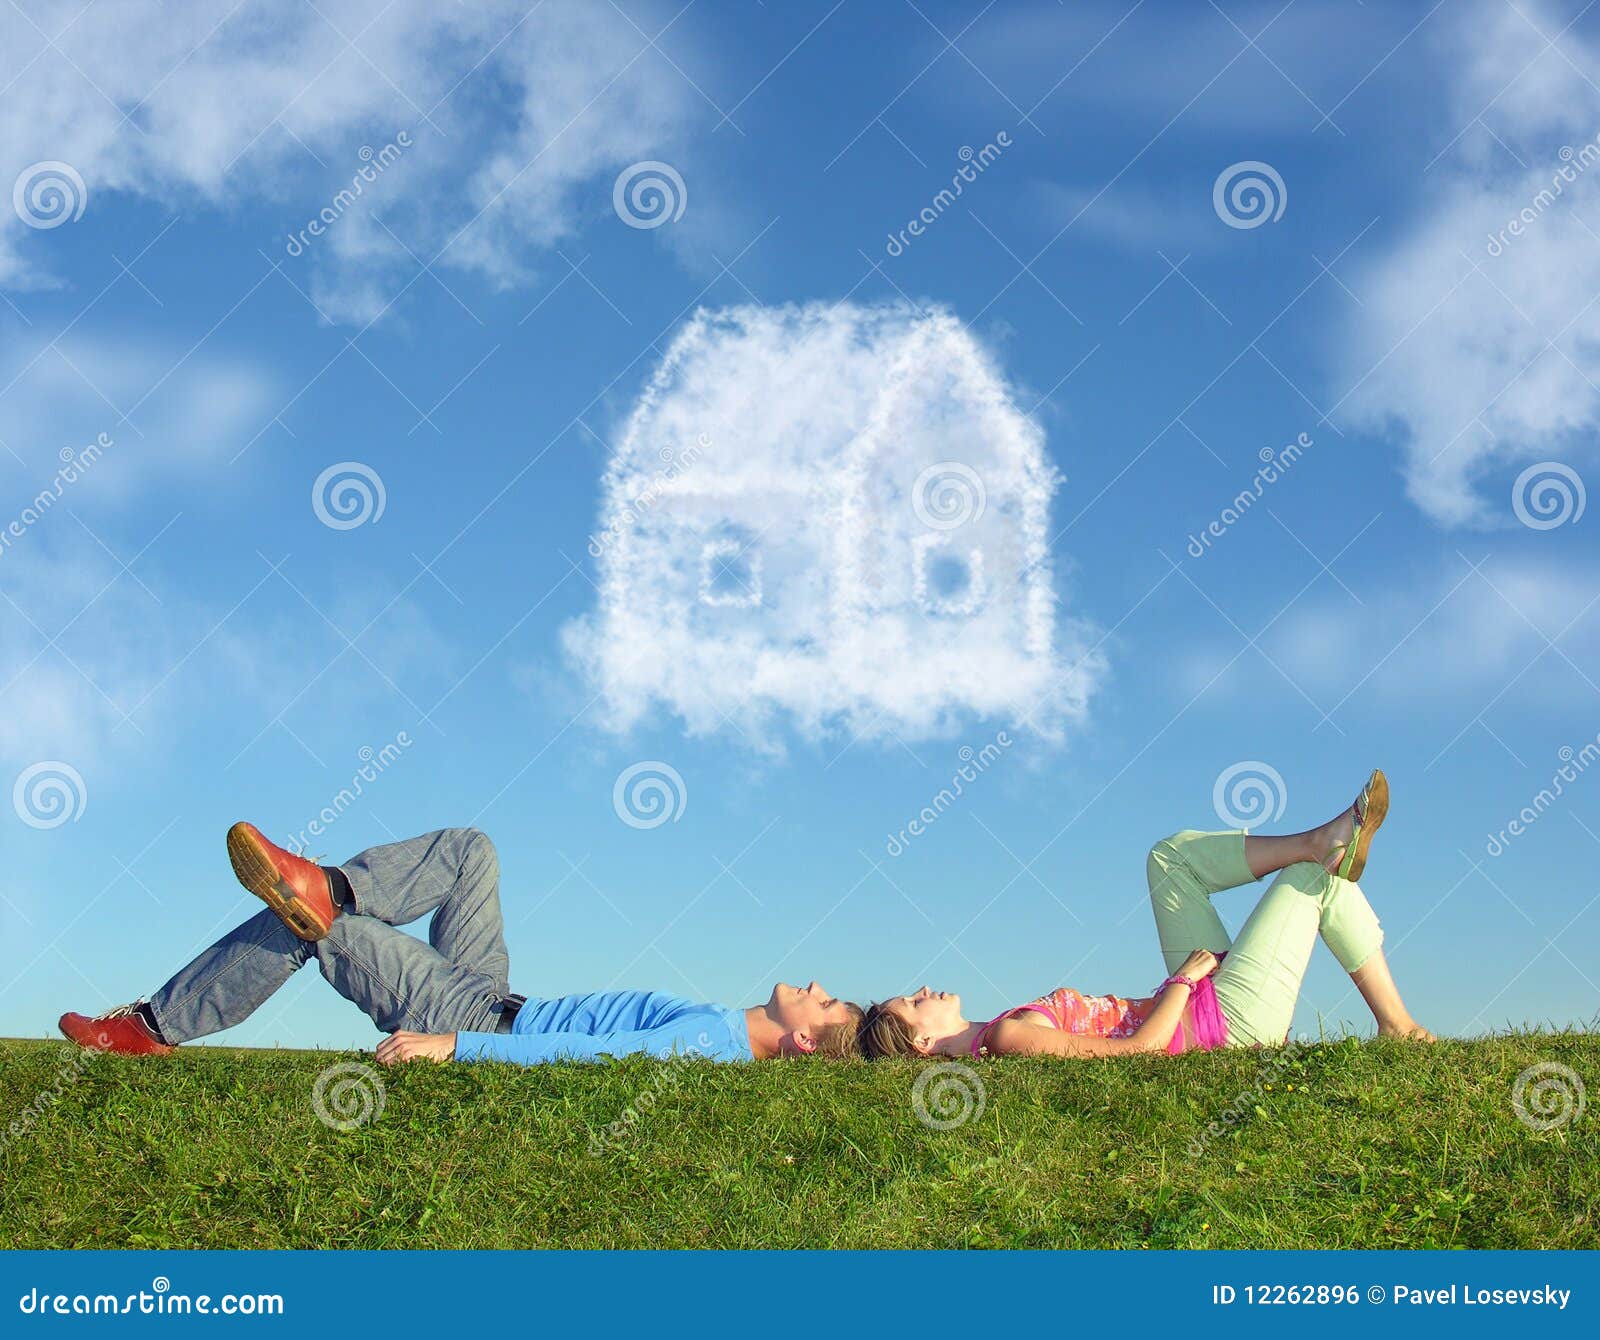 lying couple on grass and dream house collage